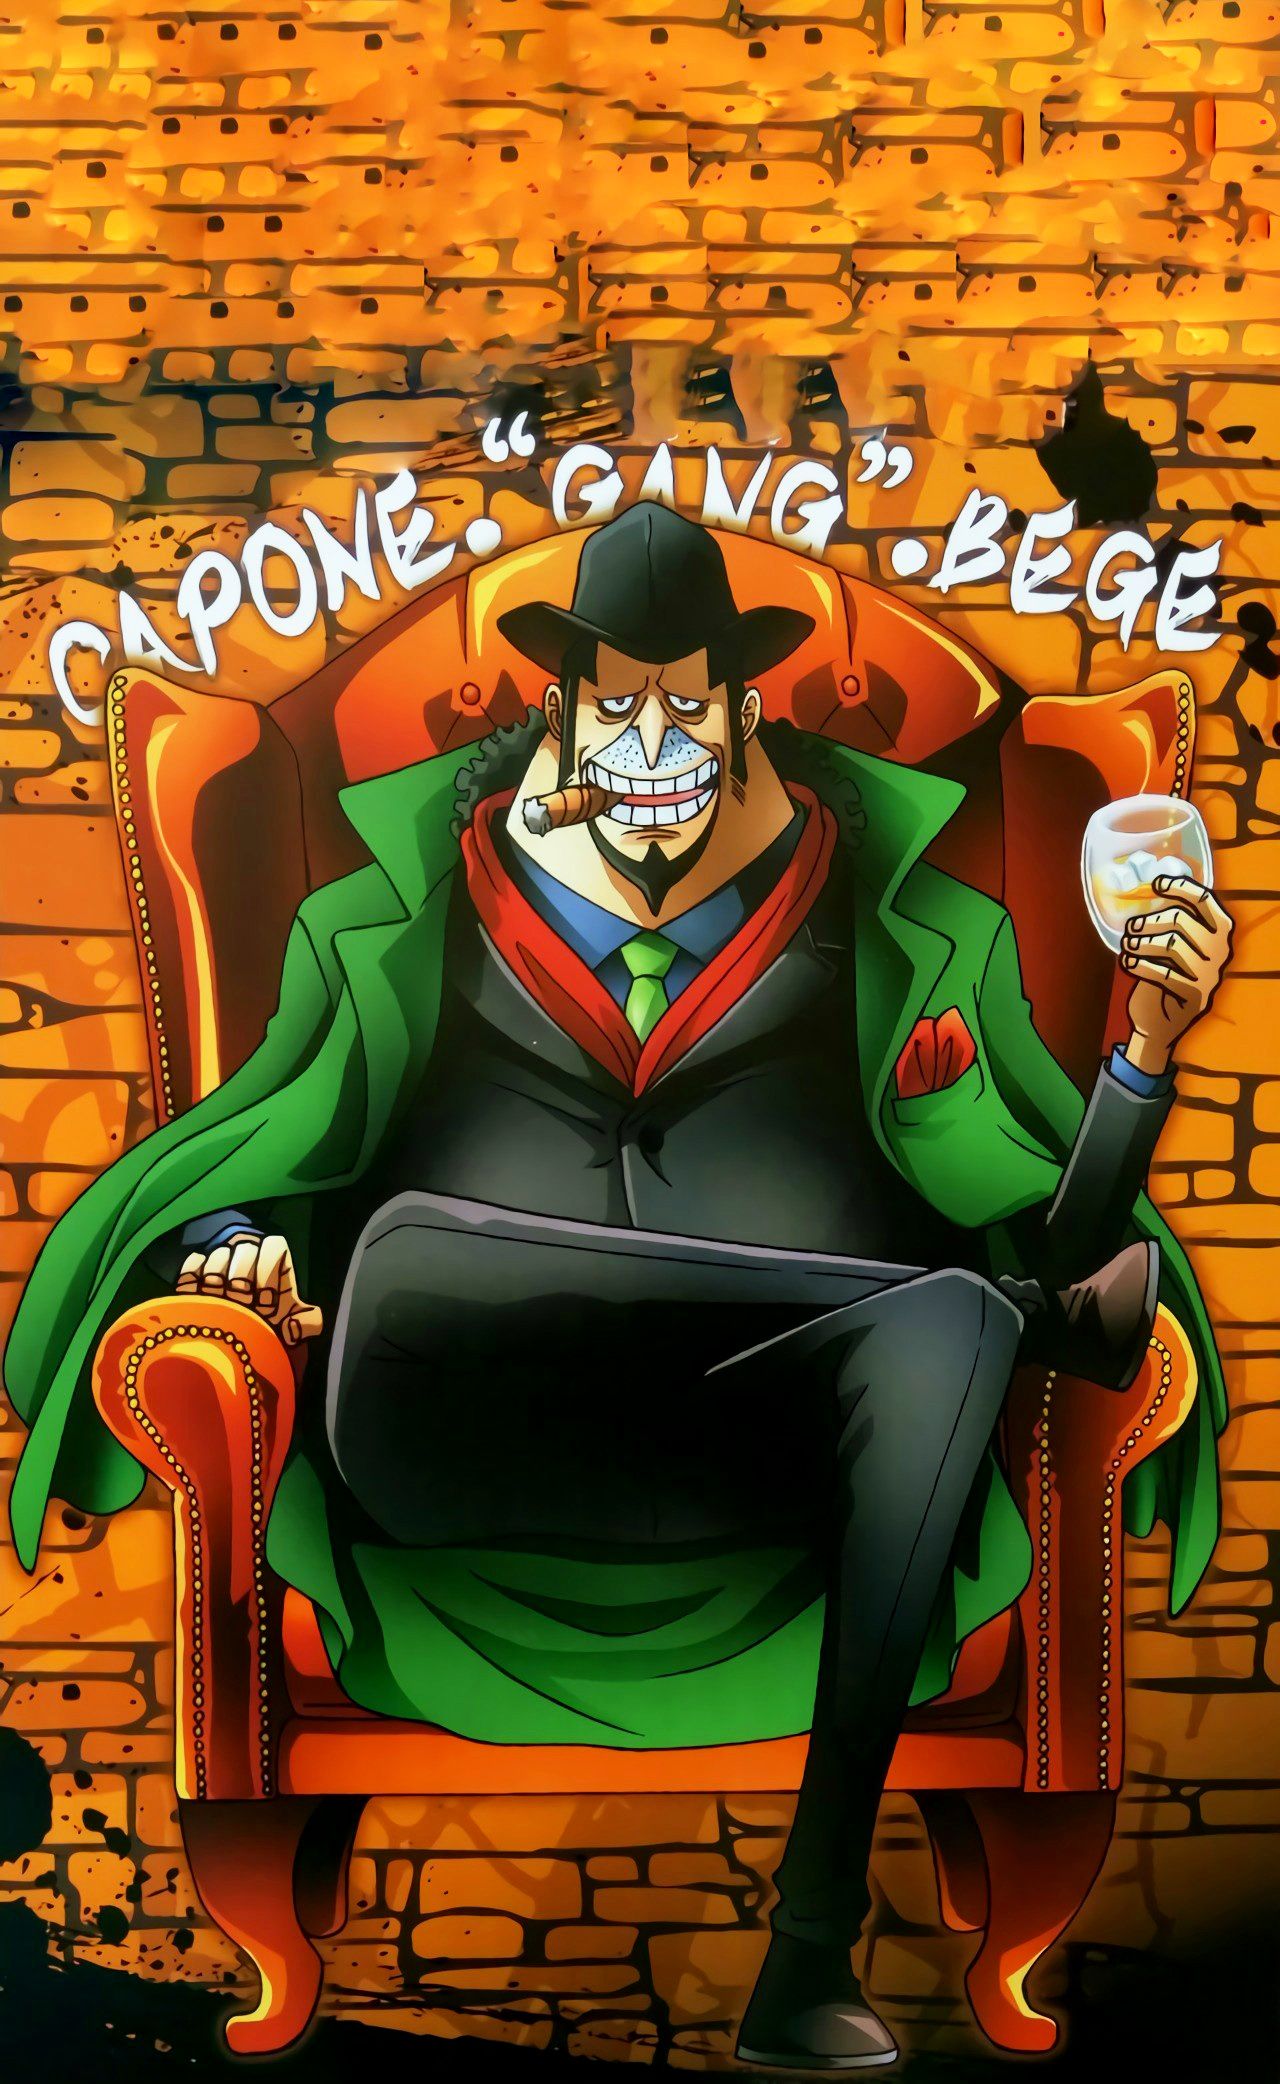 Capone Bege and Scan Gallery